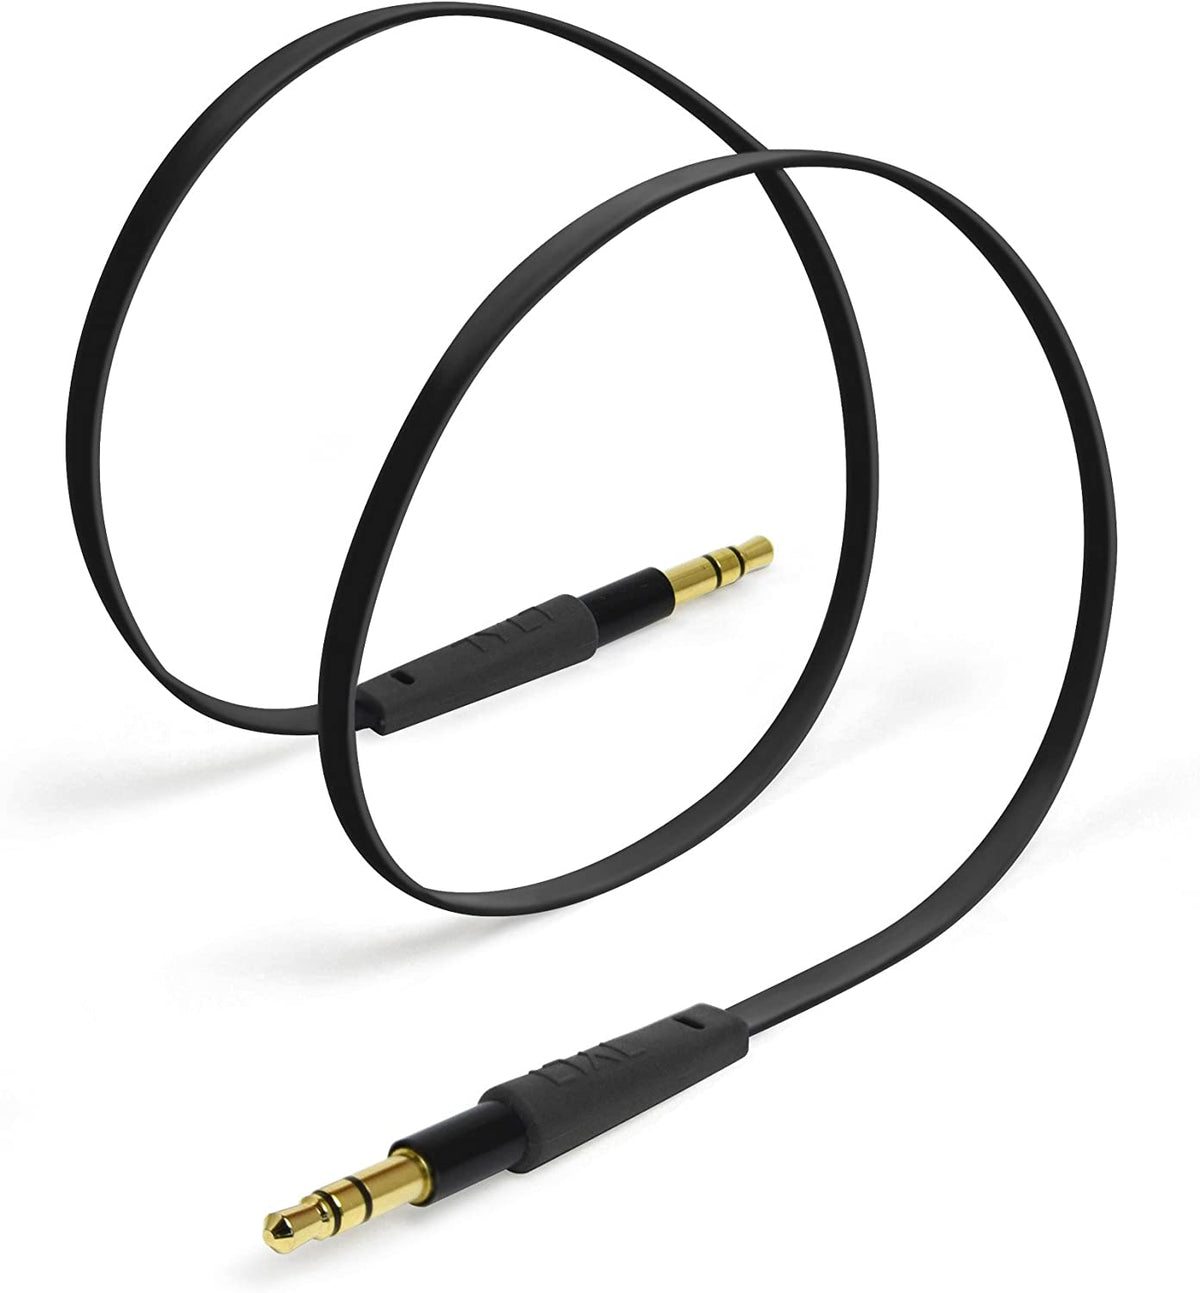 TYLT AUX 3.5mm Stereo Auxiliary Cable - Black